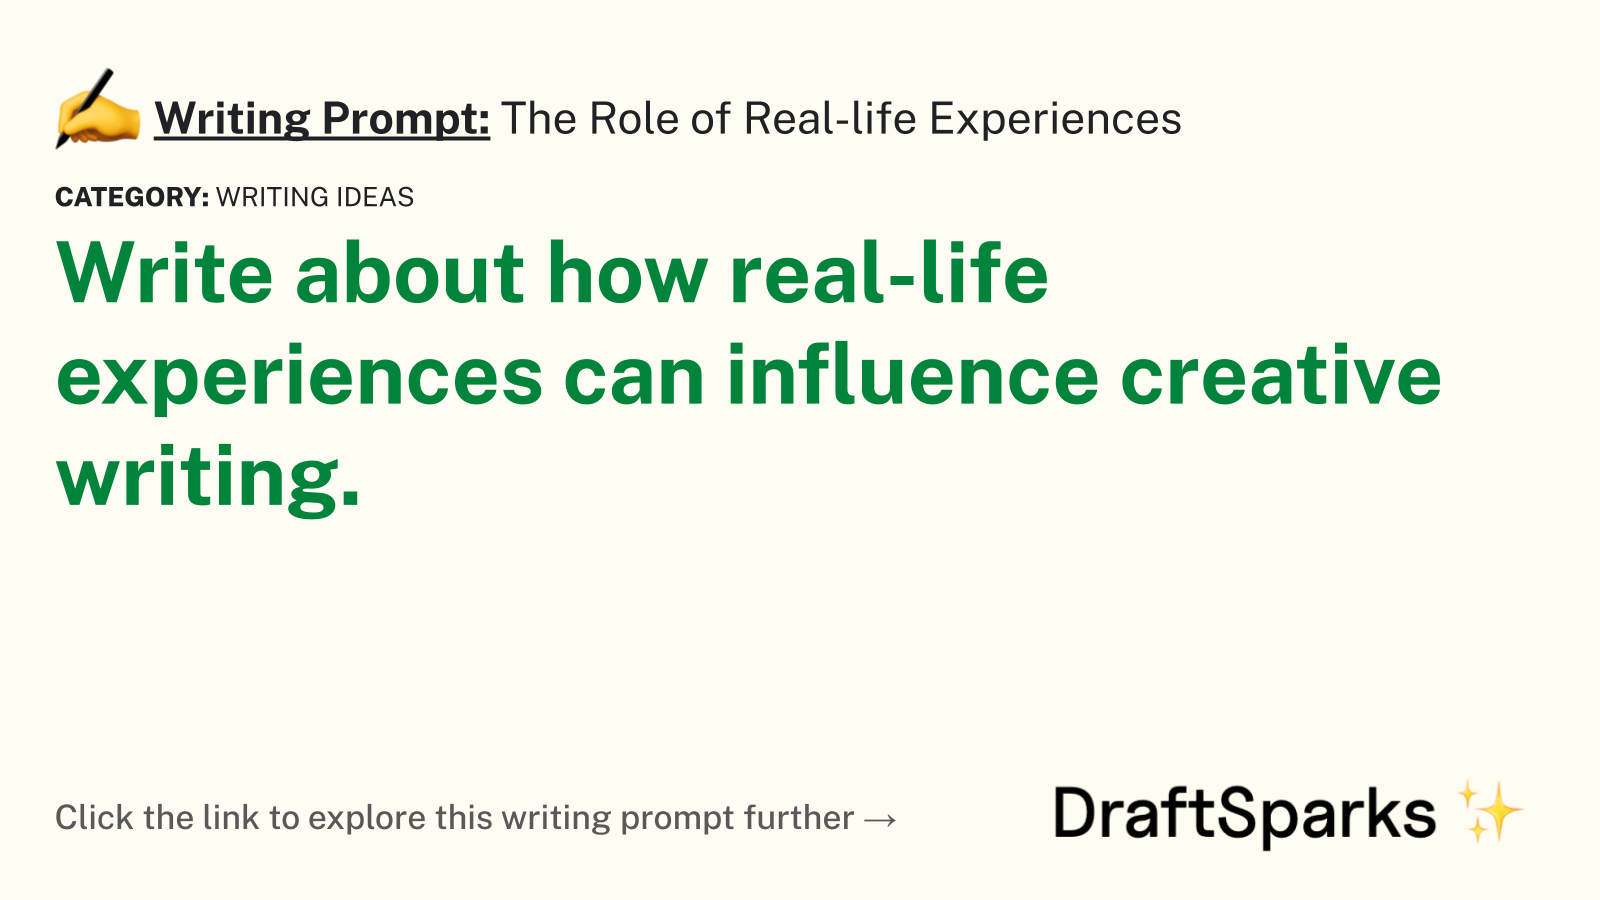 The Role of Real-life Experiences